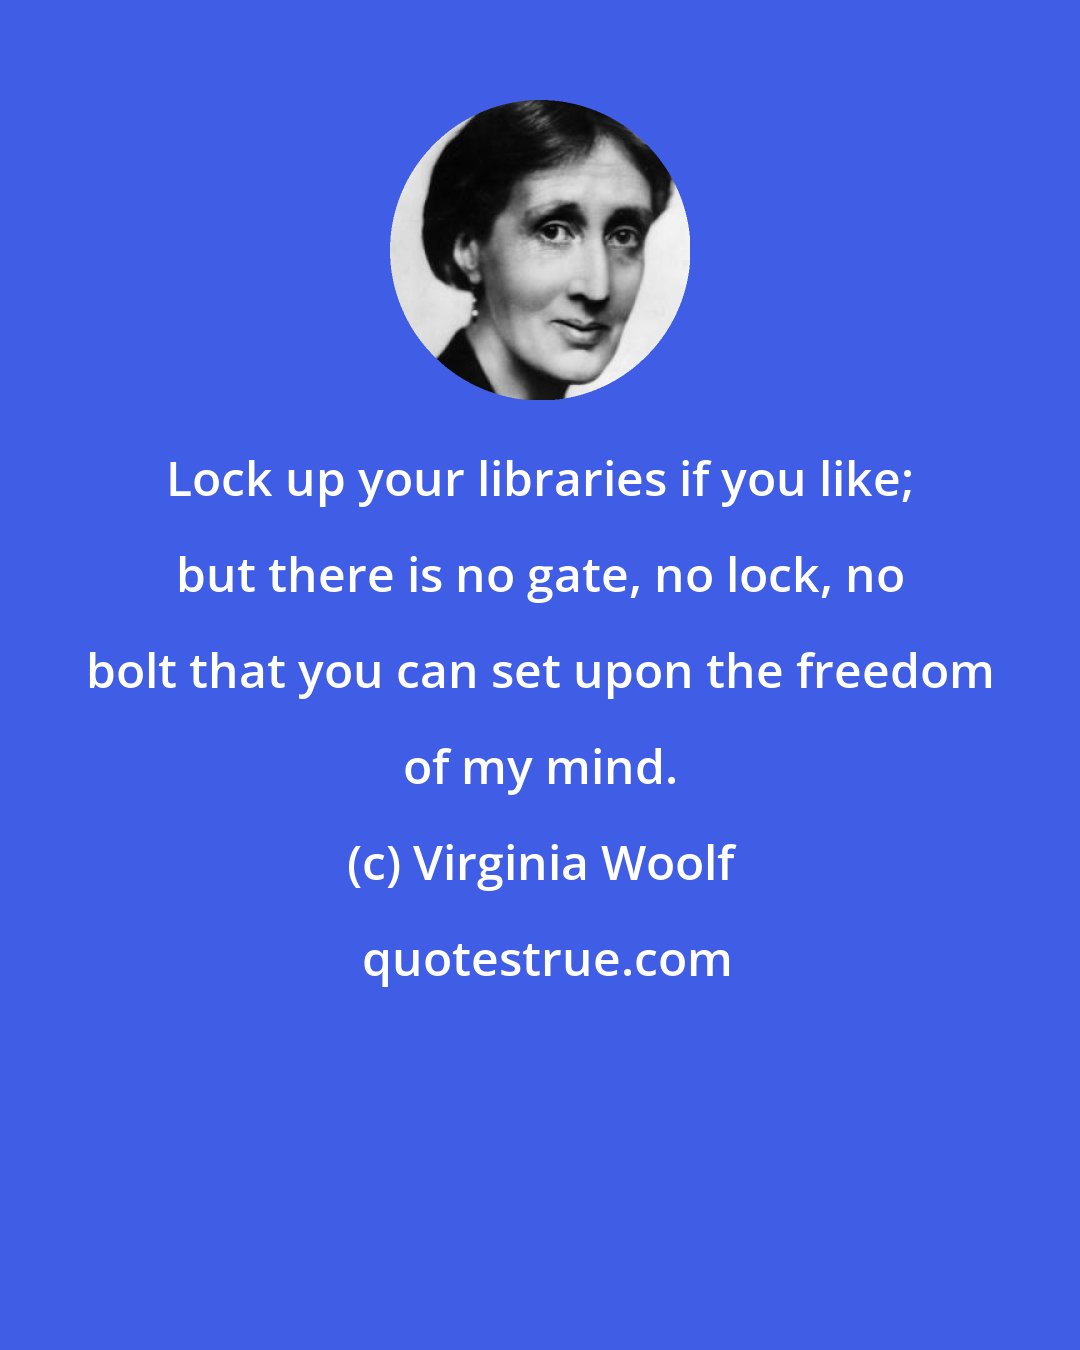 Virginia Woolf: Lock up your libraries if you like; but there is no gate, no lock, no bolt that you can set upon the freedom of my mind.